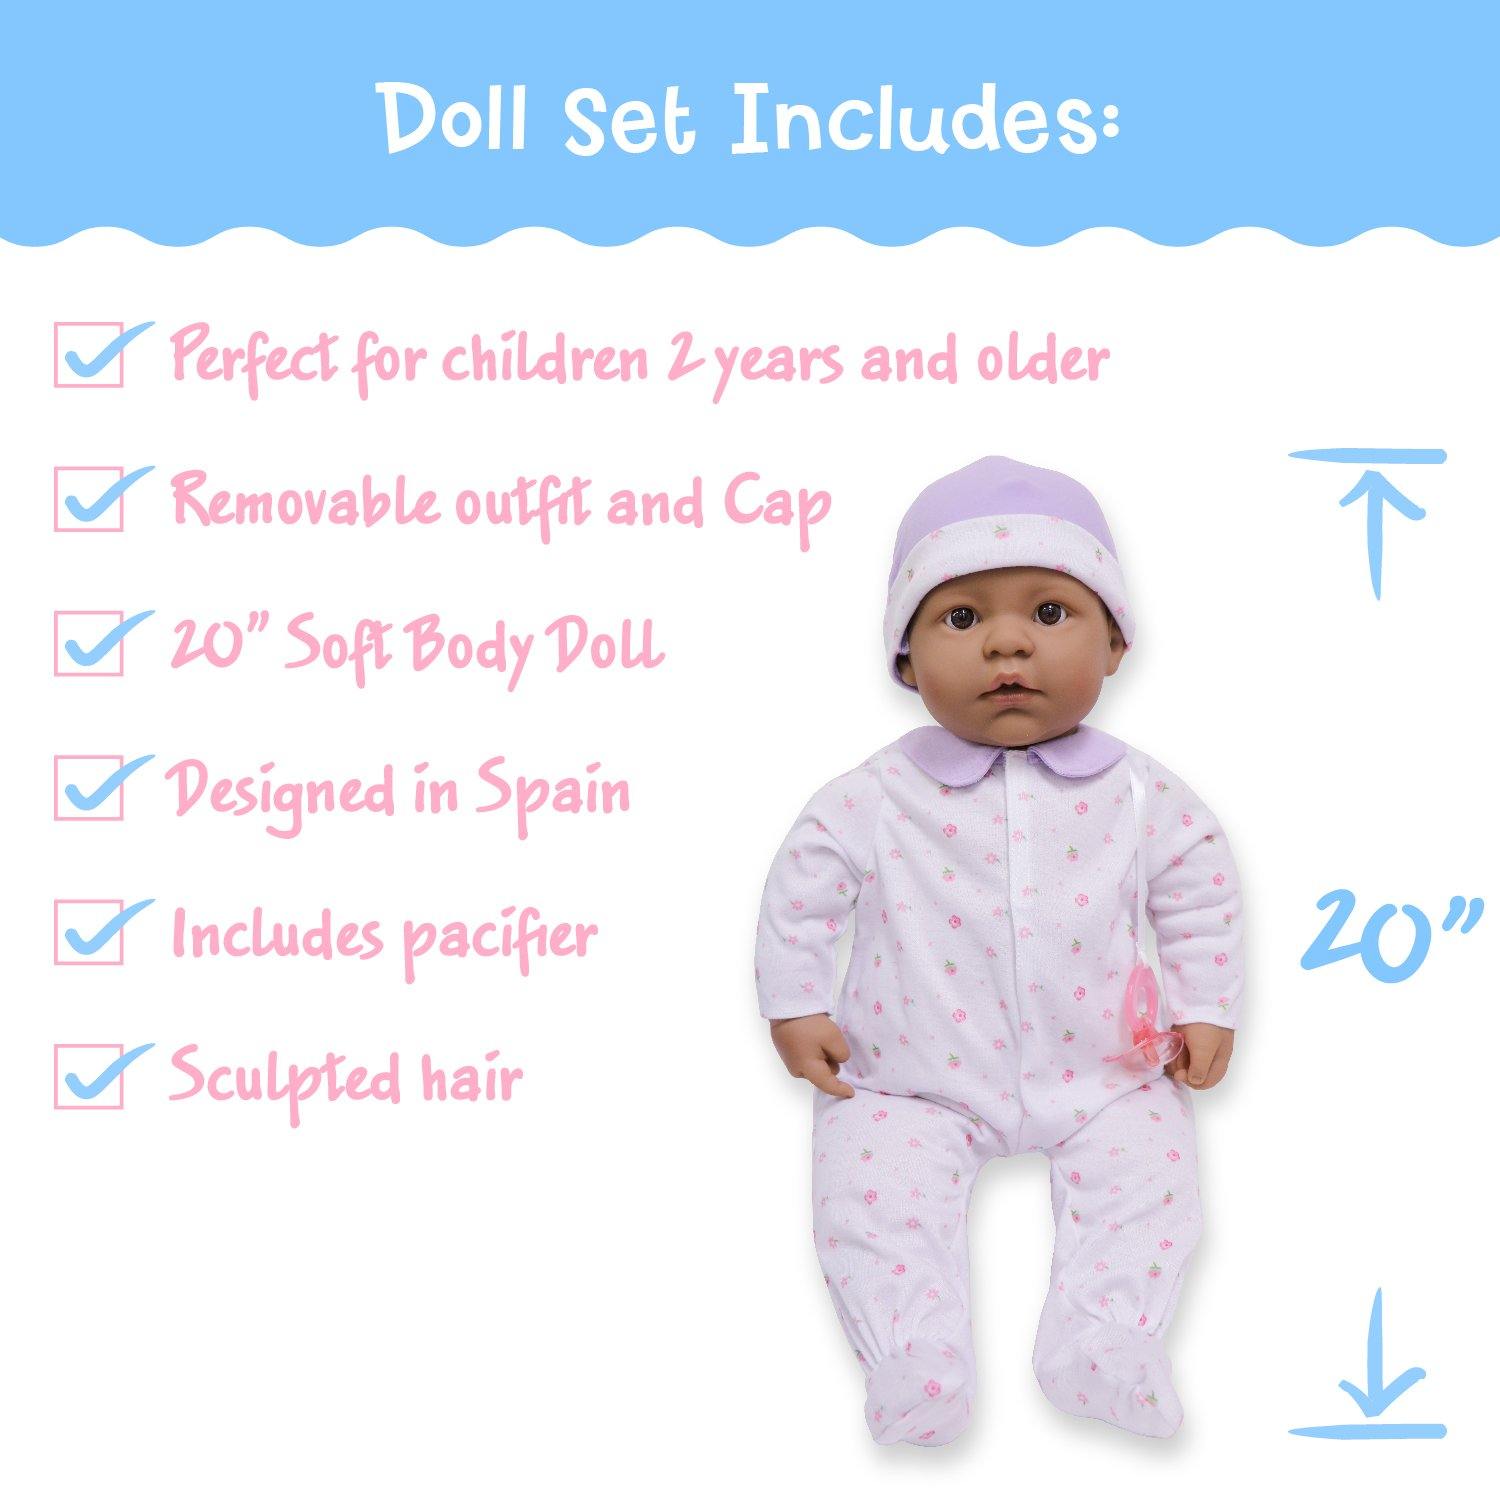 La Baby Play Doll - 20" Hispanic Soft Body Baby Doll in baby outfit Purple w/ Pacifier - JC Toys Group Inc.